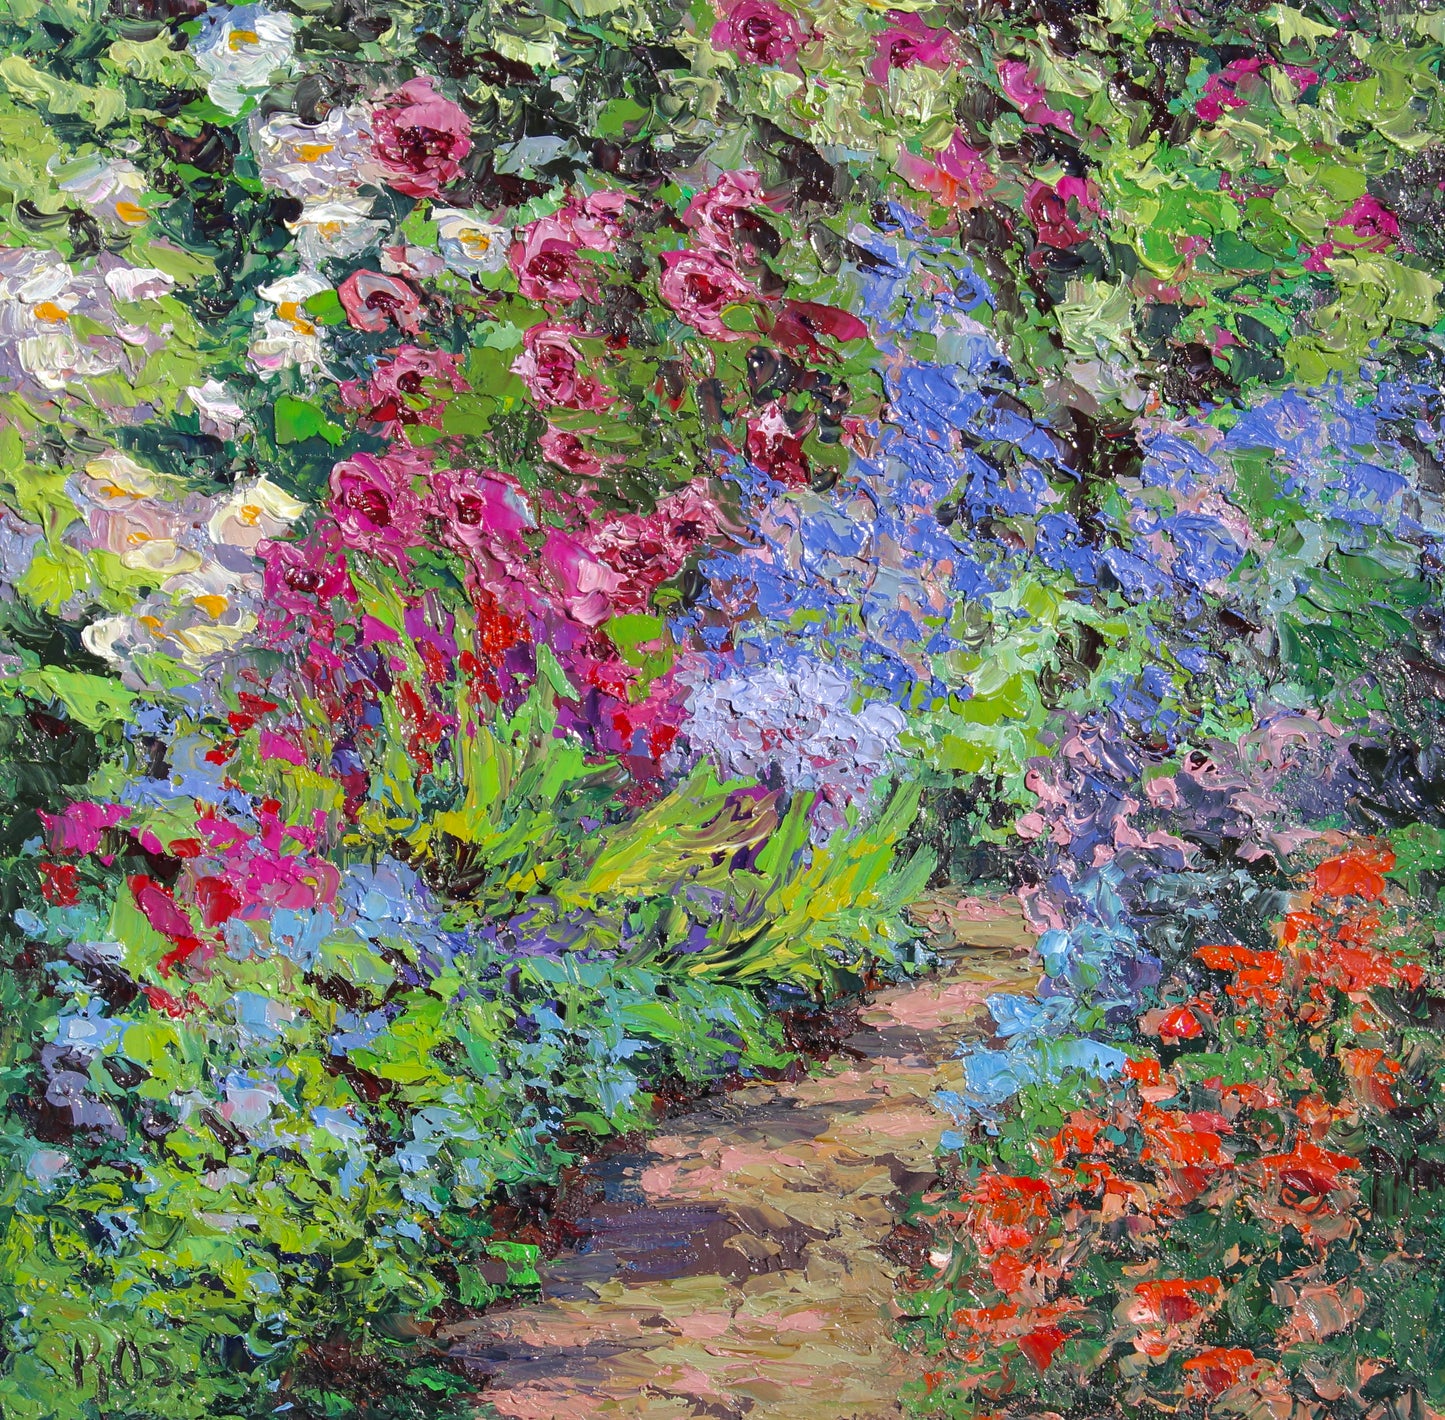 Country Garden, Original 10" Square Oil Painting On Canvas Panel